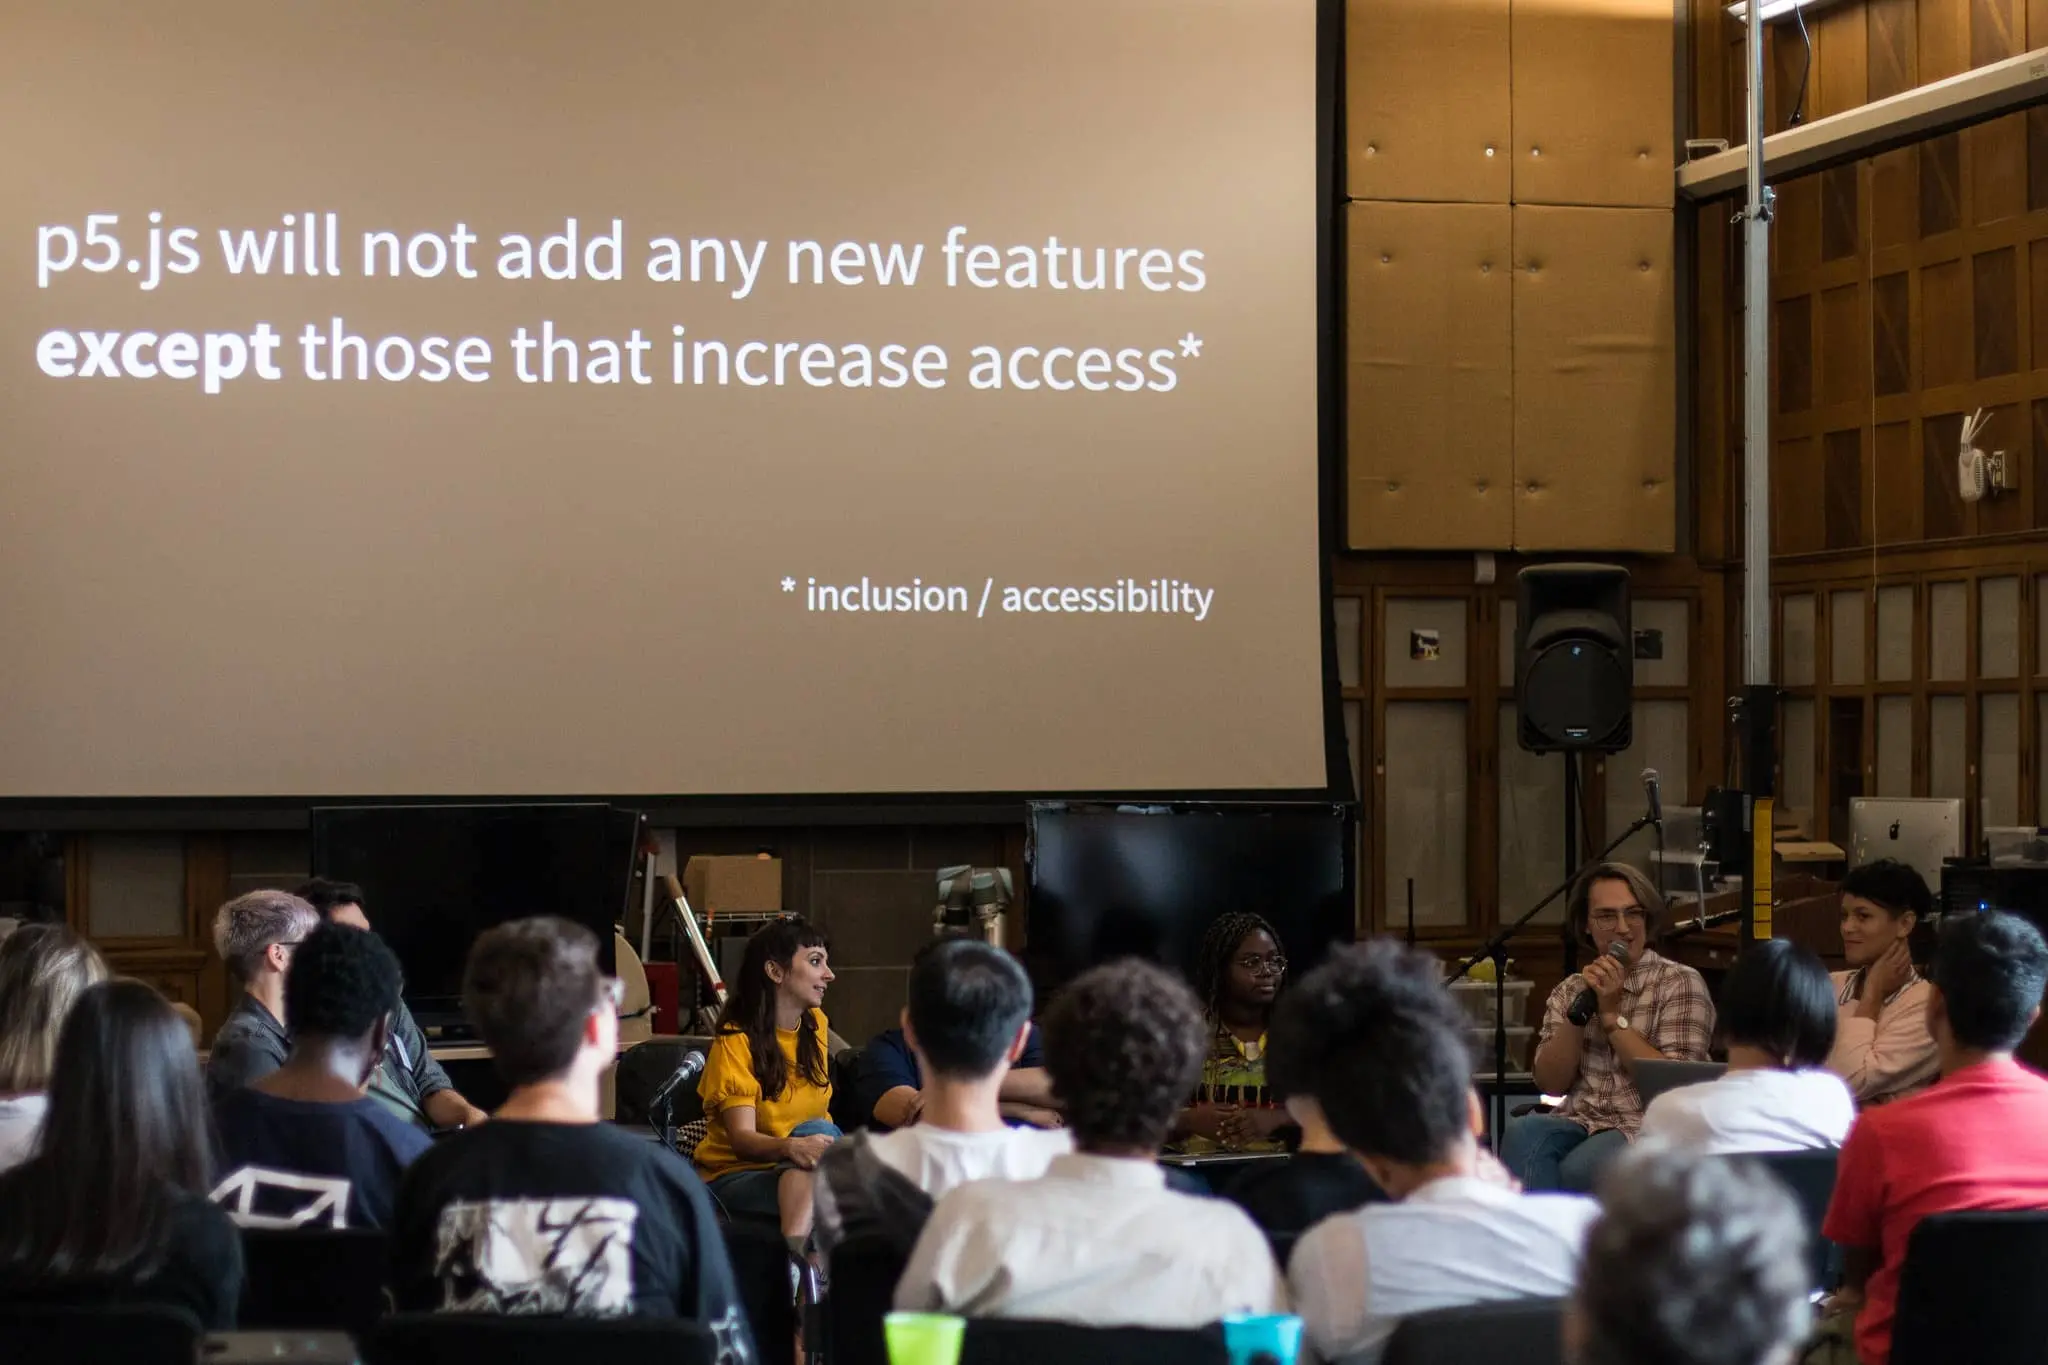 Person with a microphone speaking to fellow participants in front of text that reads p5.js will not add any new features except those that increase access.